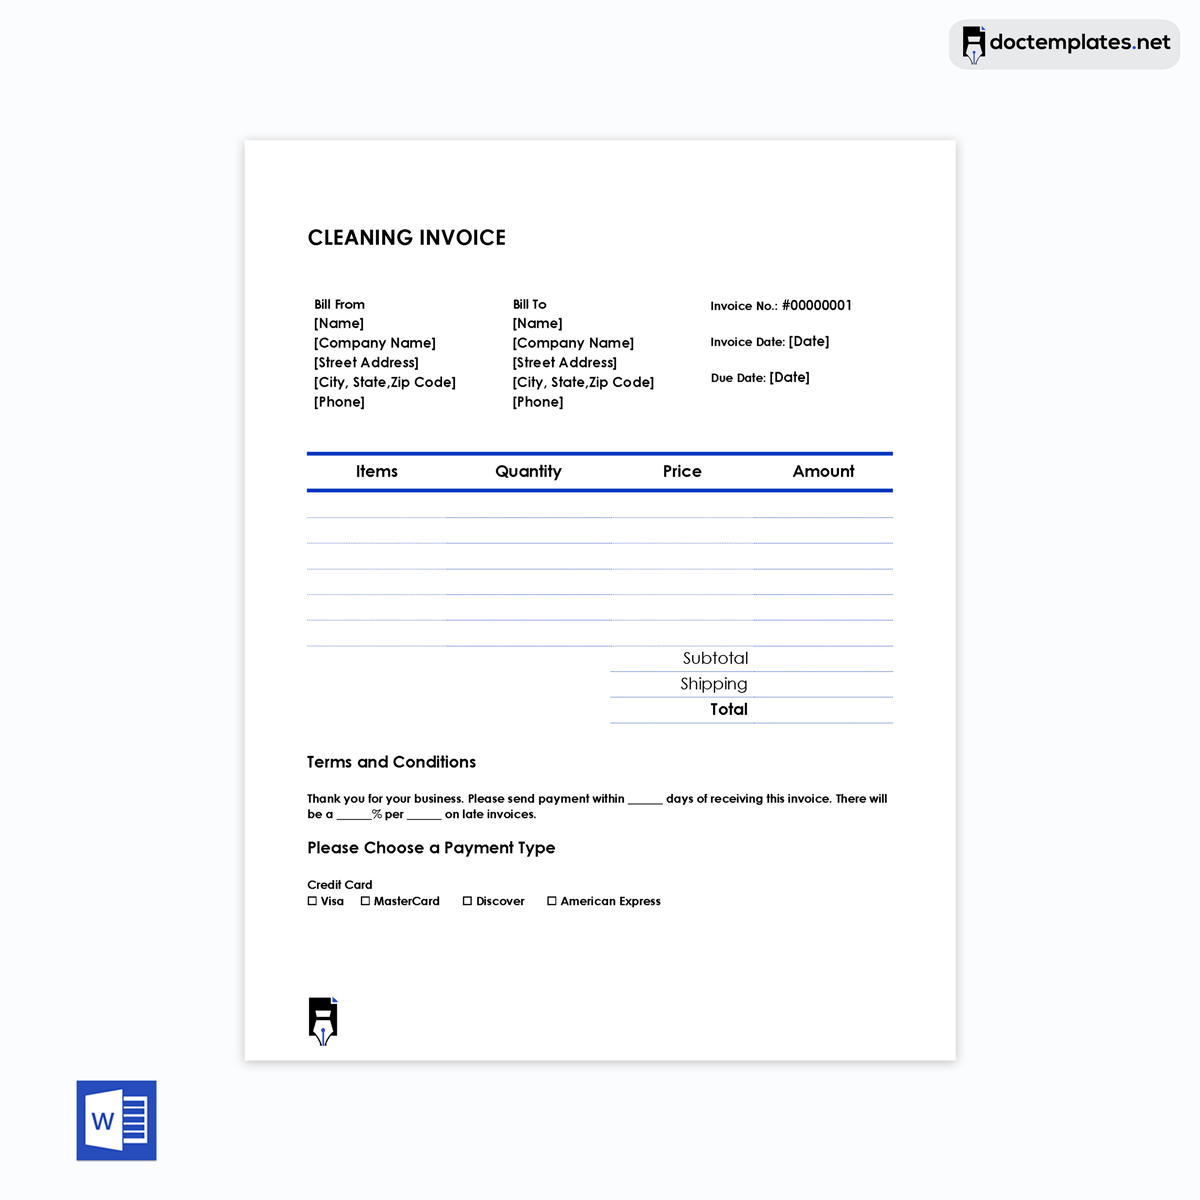 Simple cleaning invoice -11